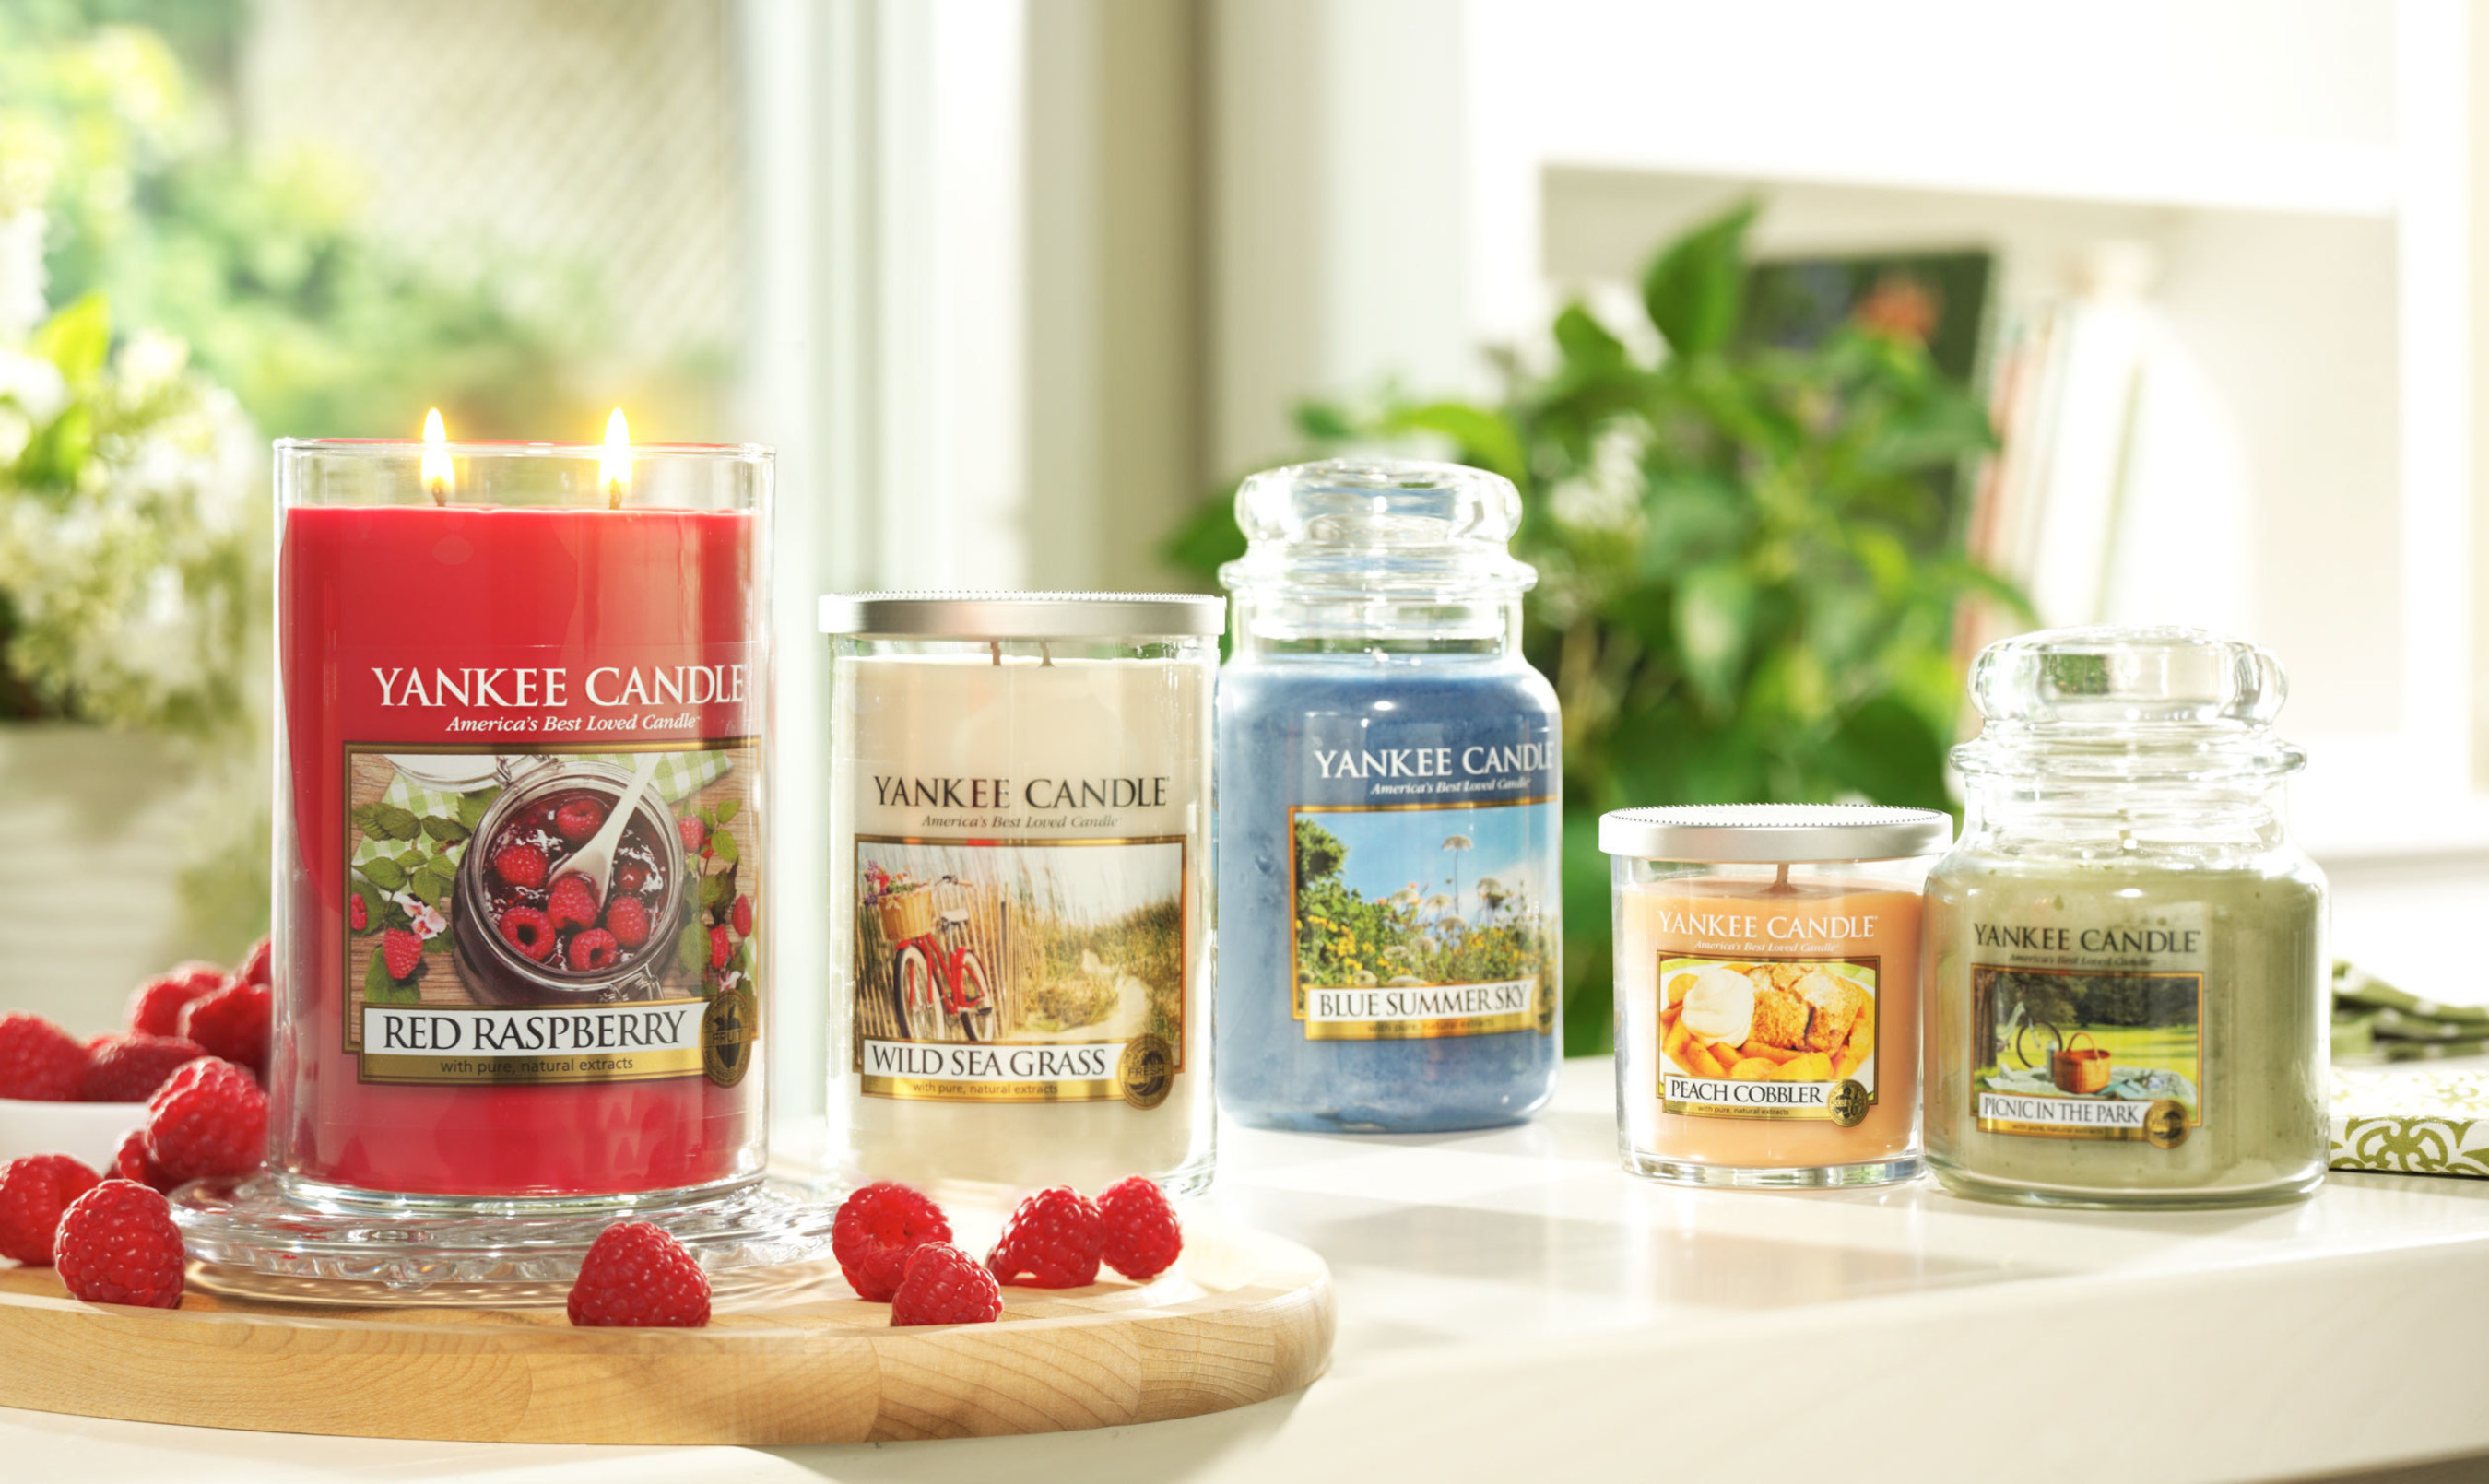 Yankee Candle Welcomes Spring with New 2015 Fragrances